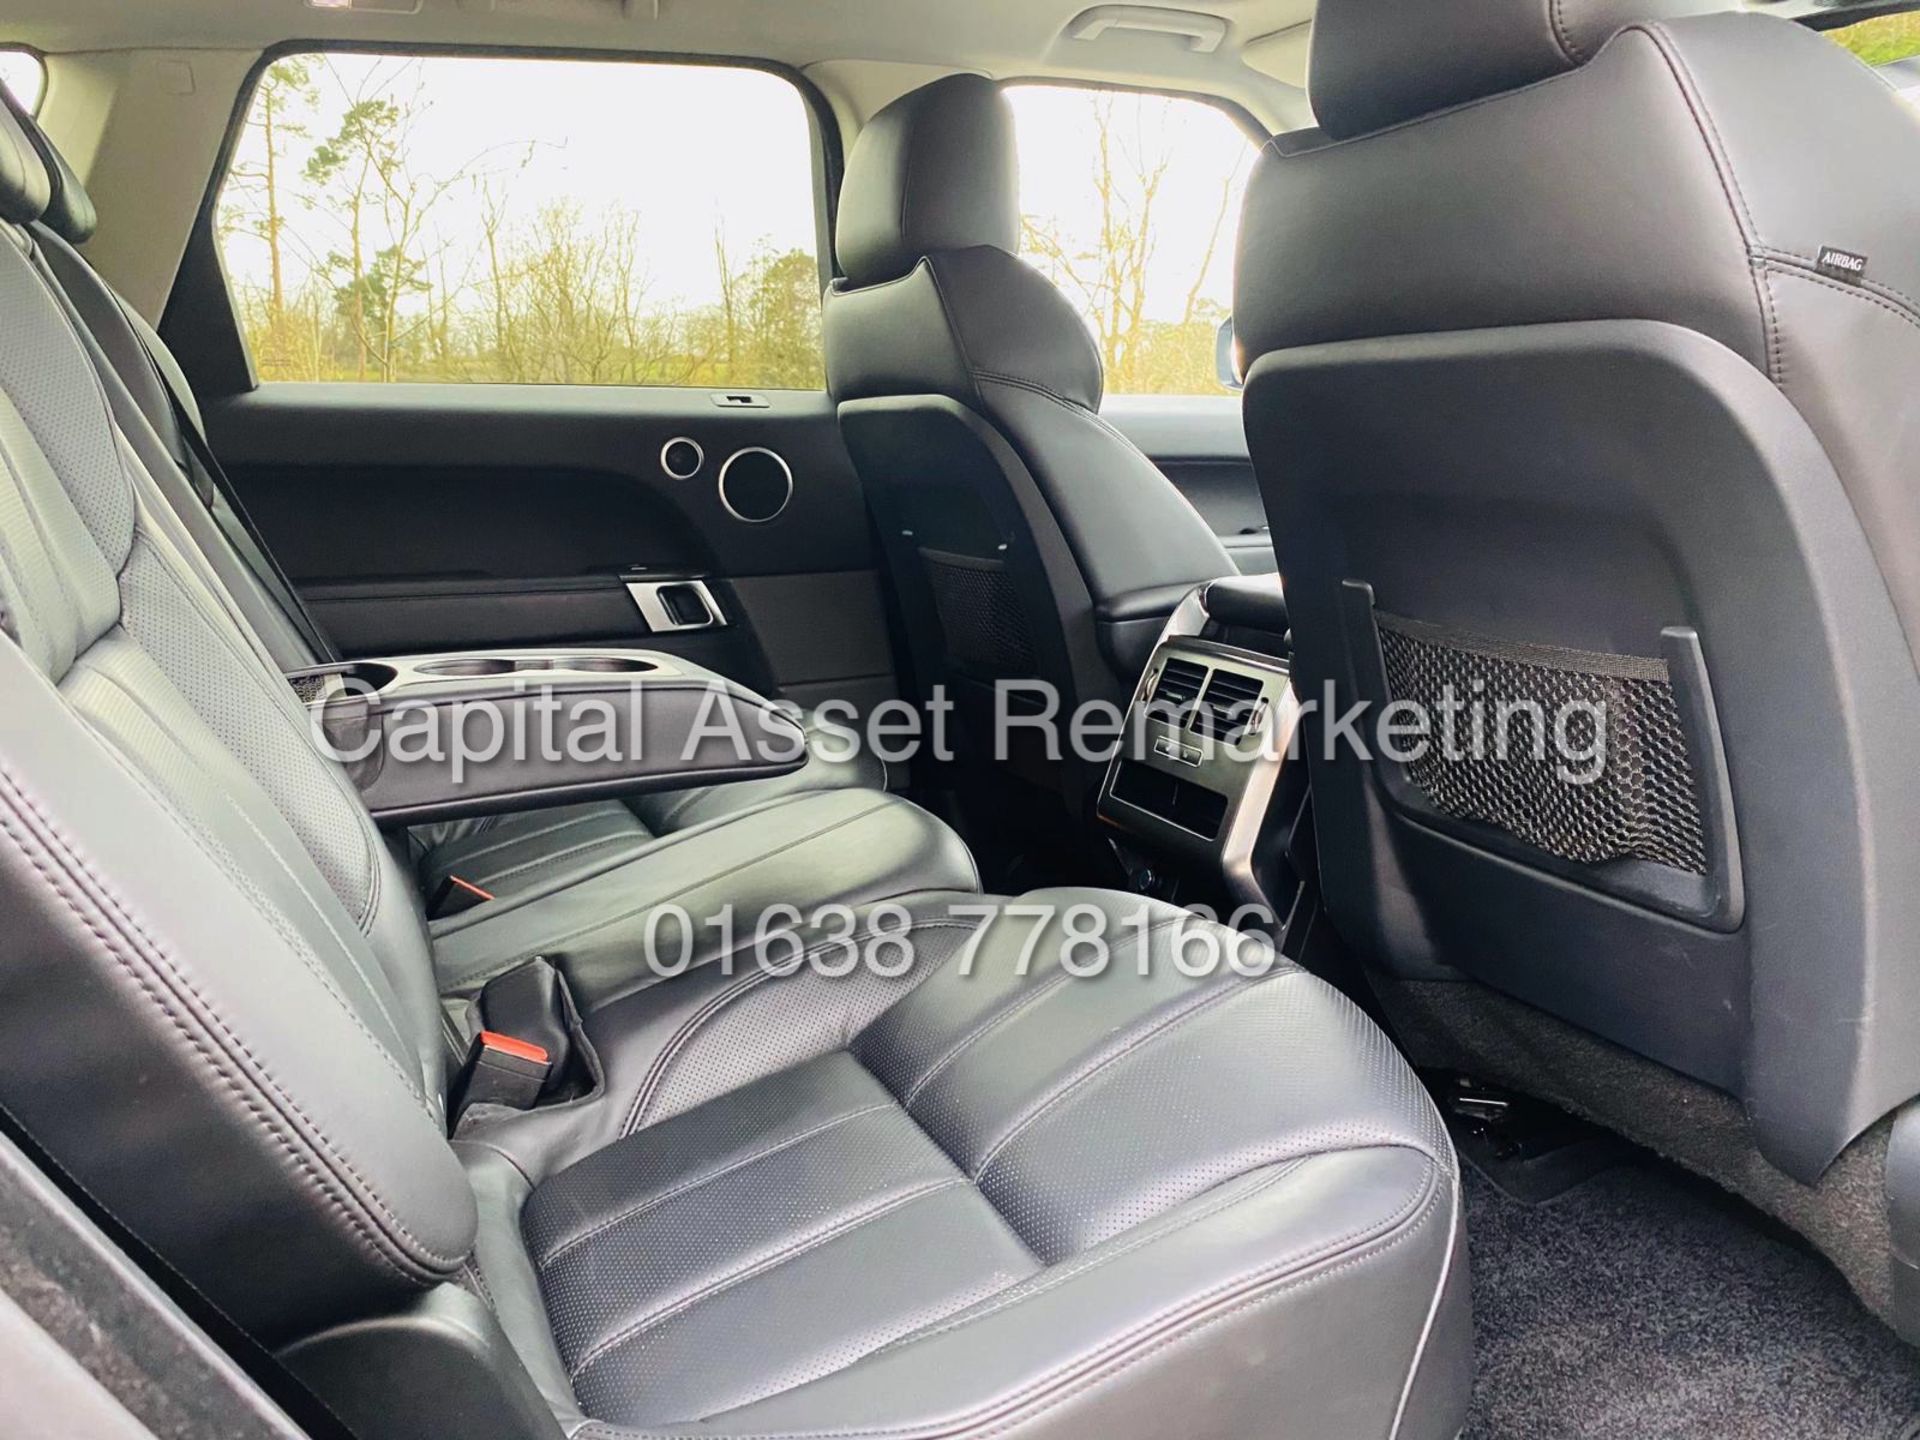 On Sale RANGE ROVER SPORT *HSE Dynamic* SUV (2017) '3.0 SDV6 - 306 BHP - 8 SPEED AUTO' FULLY LOADED - Image 23 of 34